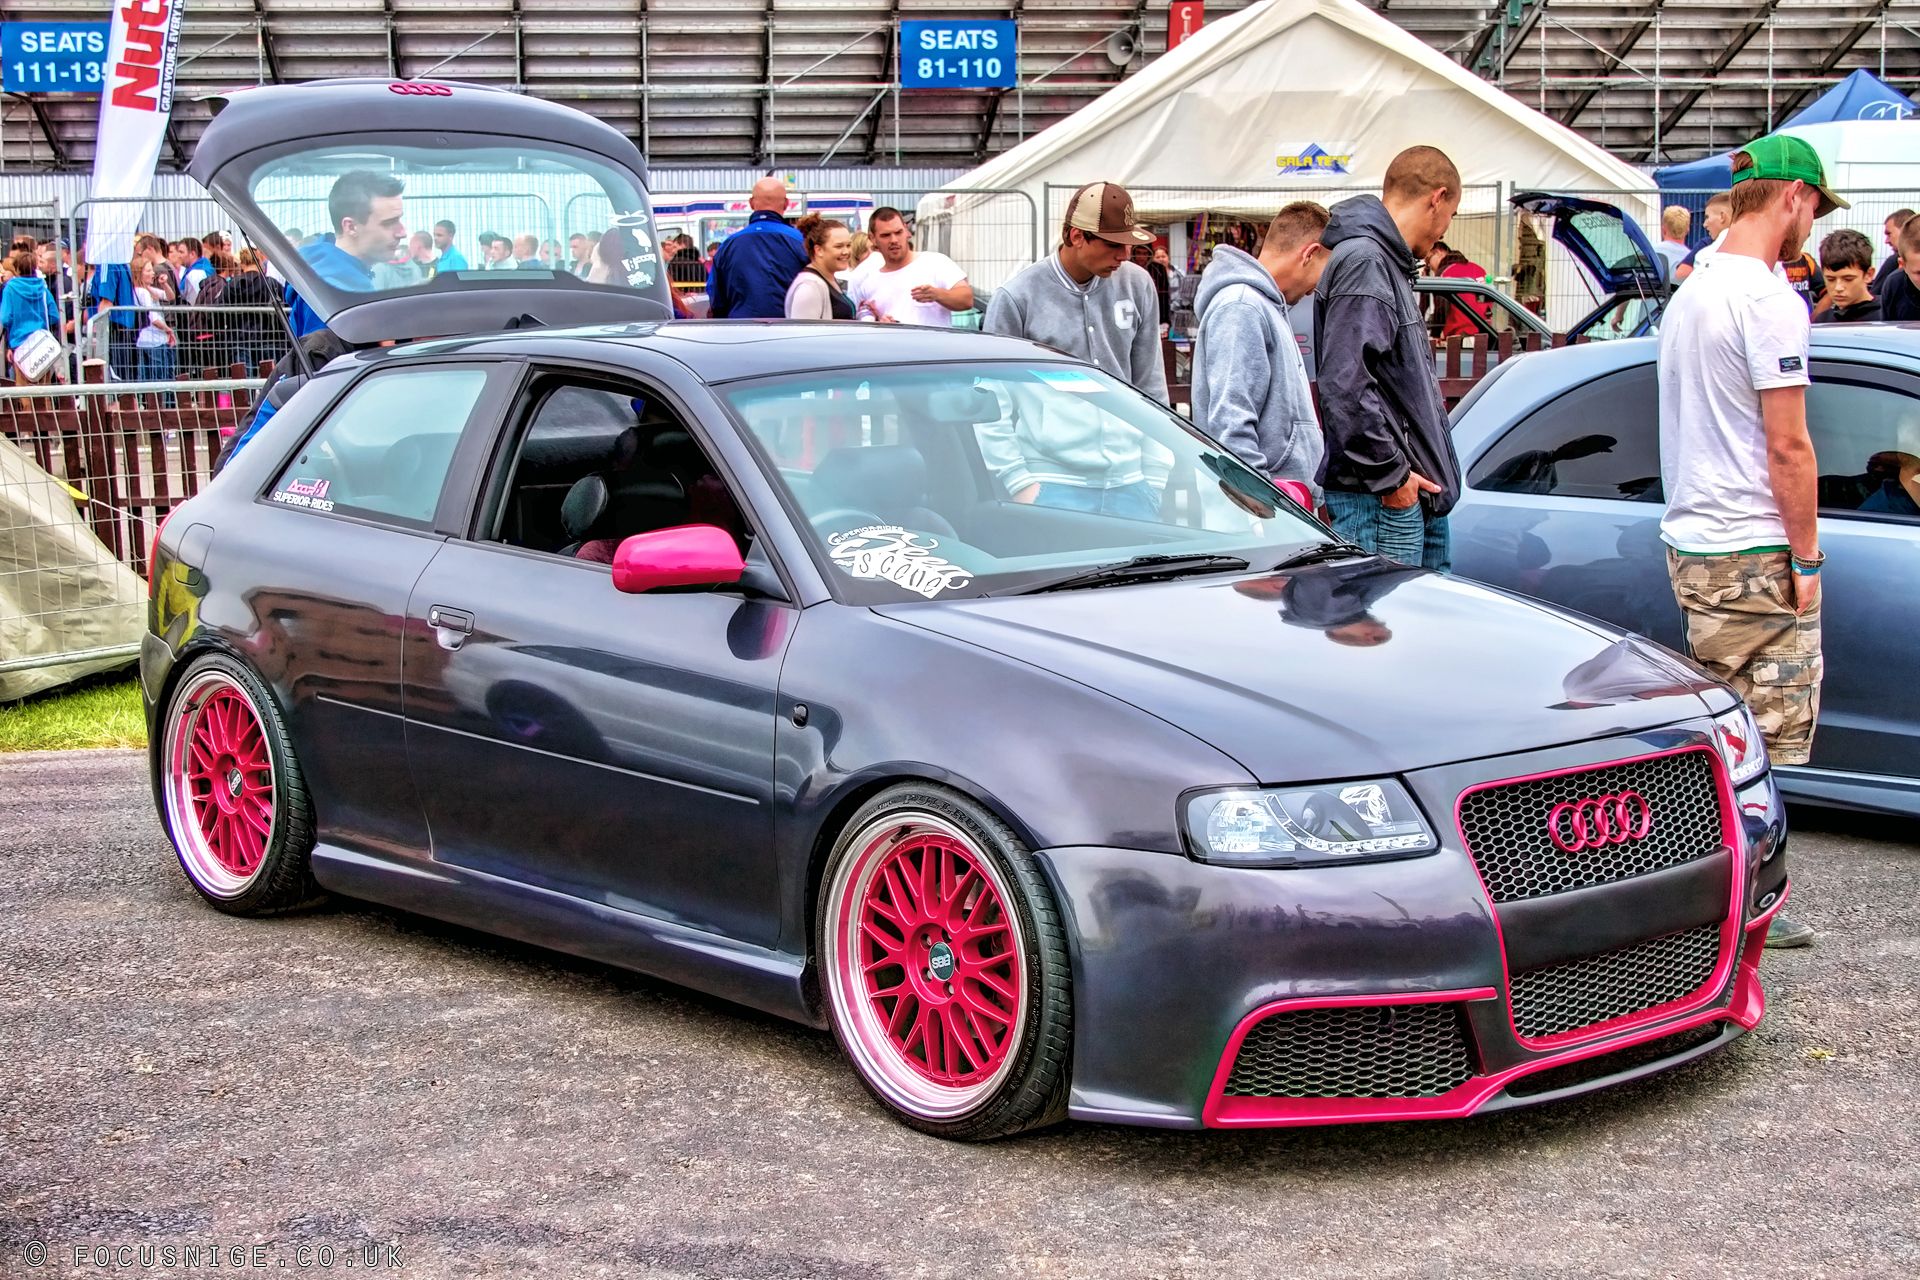 Forms tuning. Audi a3 Tuning. Audi s3 8p tuned. Audi a3 1998 Tuning. Тюнингованная Ауди а3.